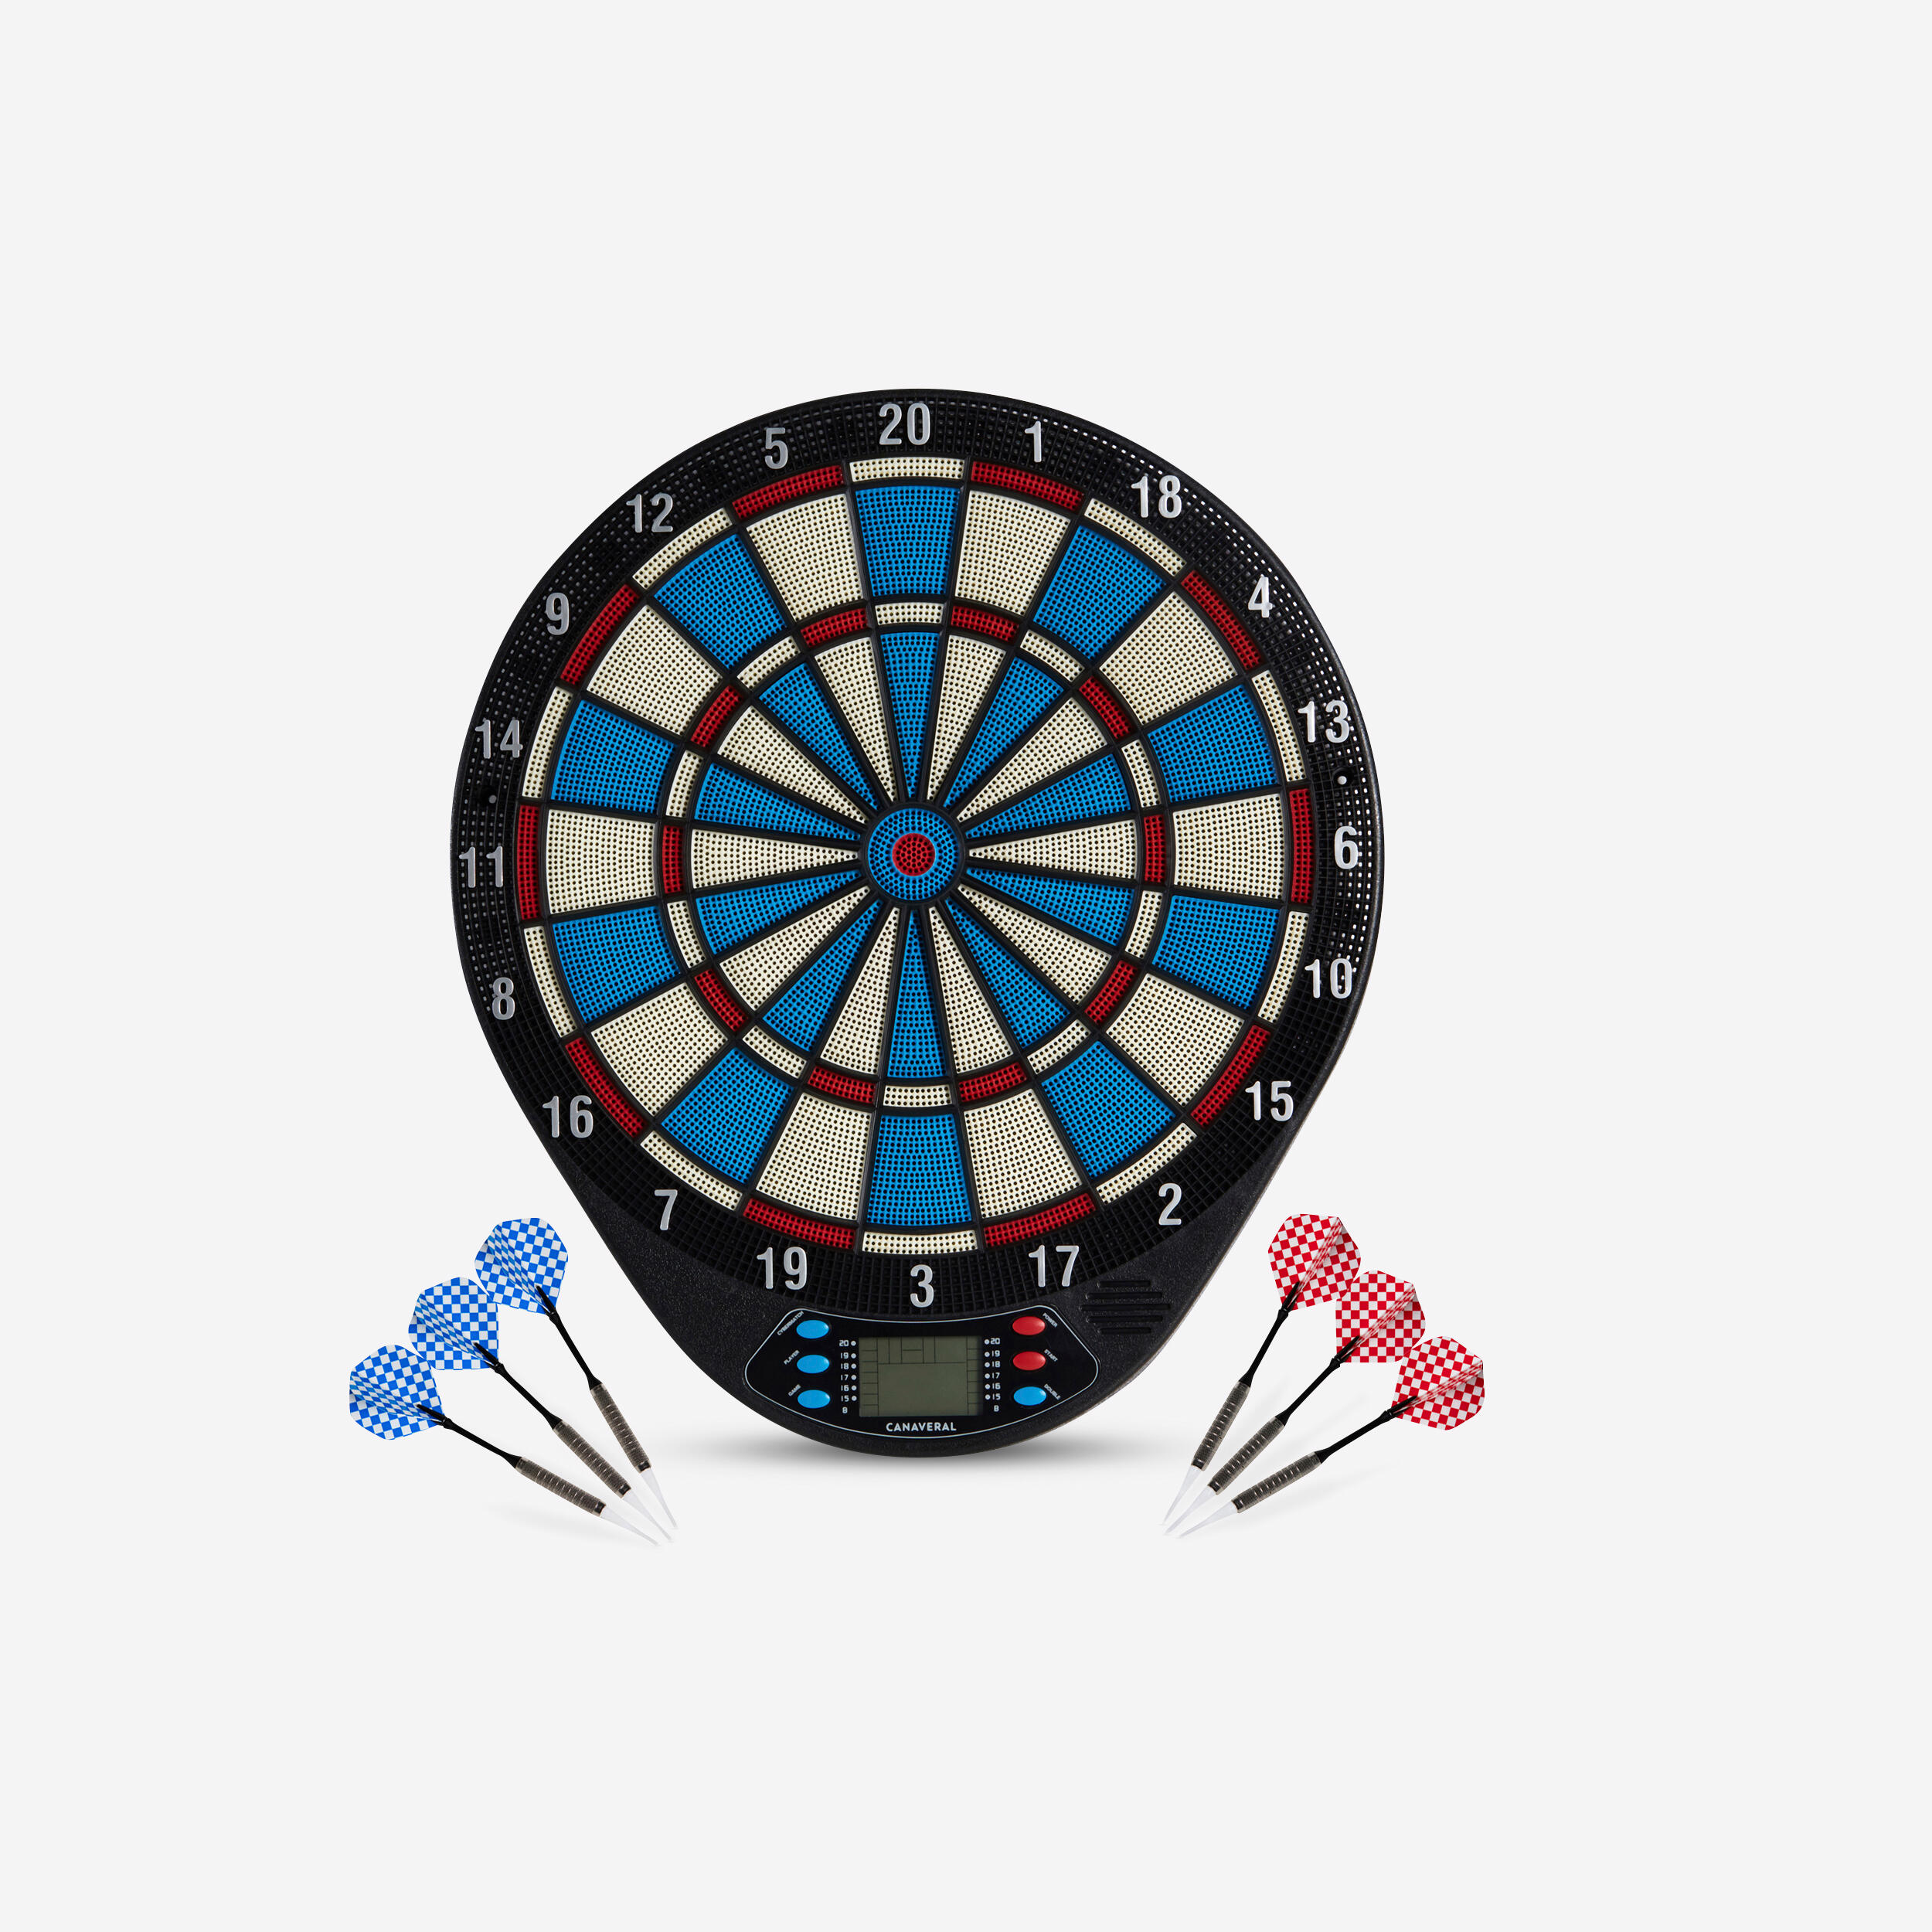 What Is an Electronic Dartboard?